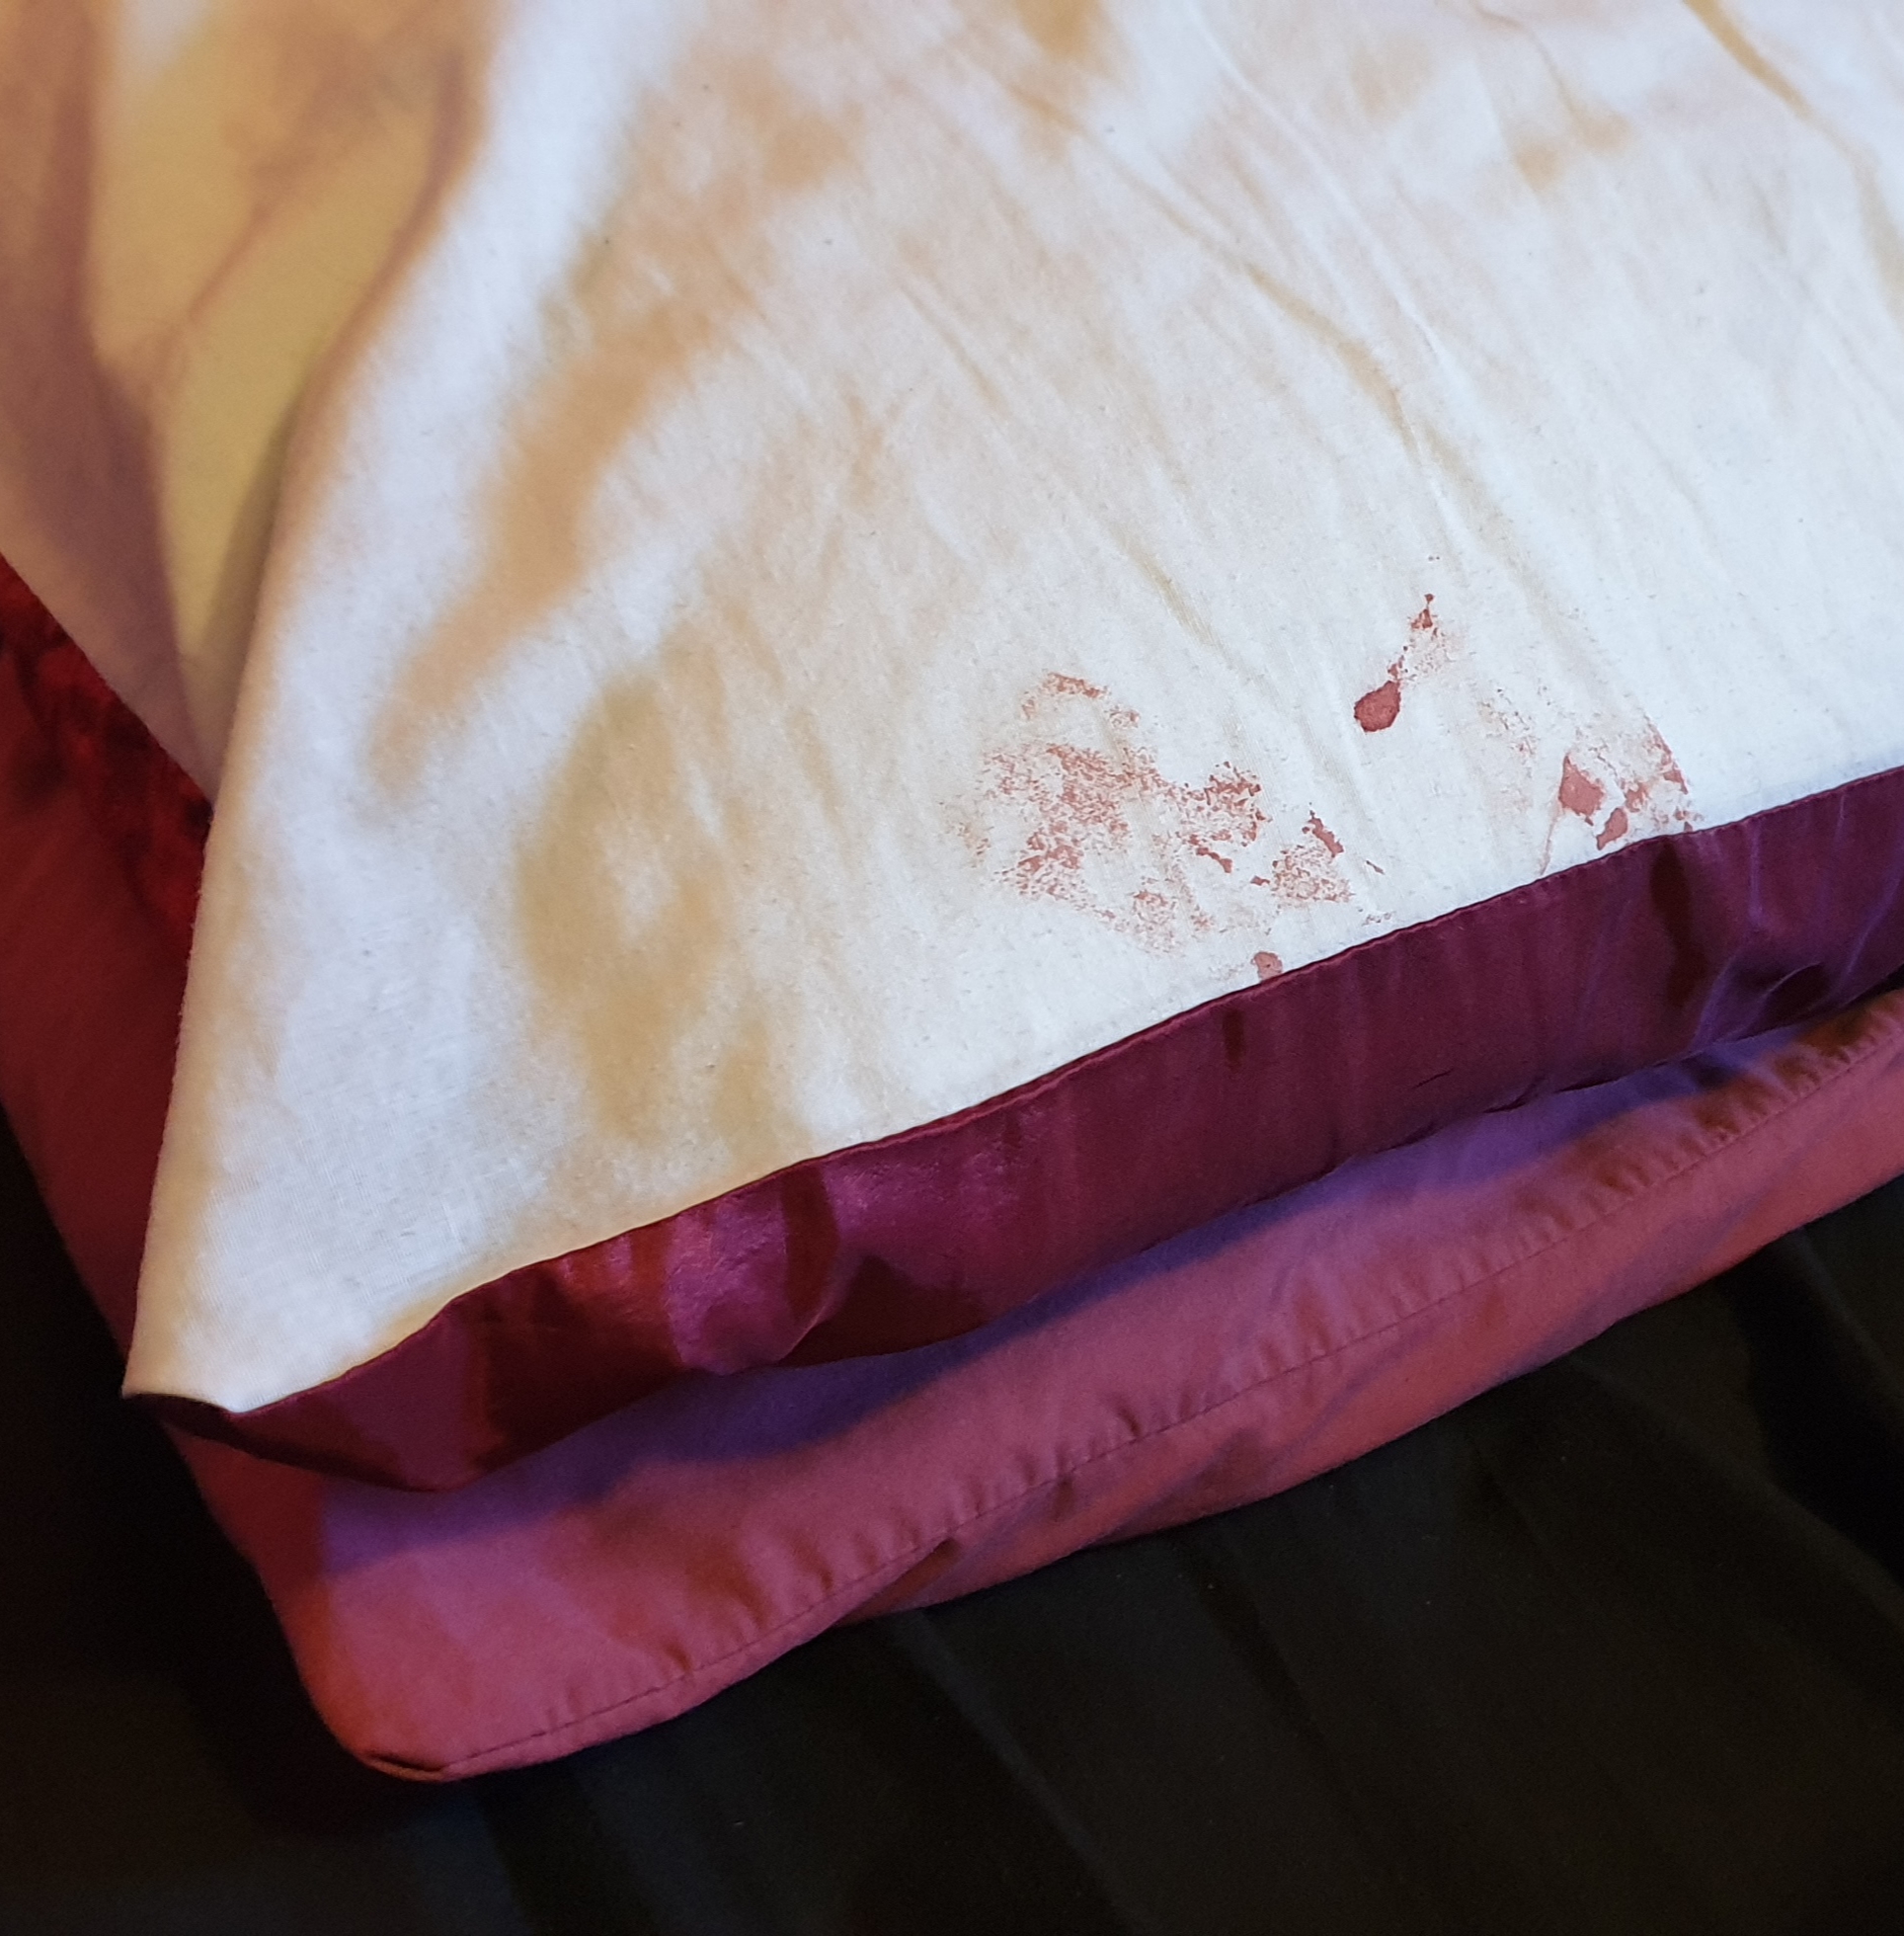 Blood on a pillow